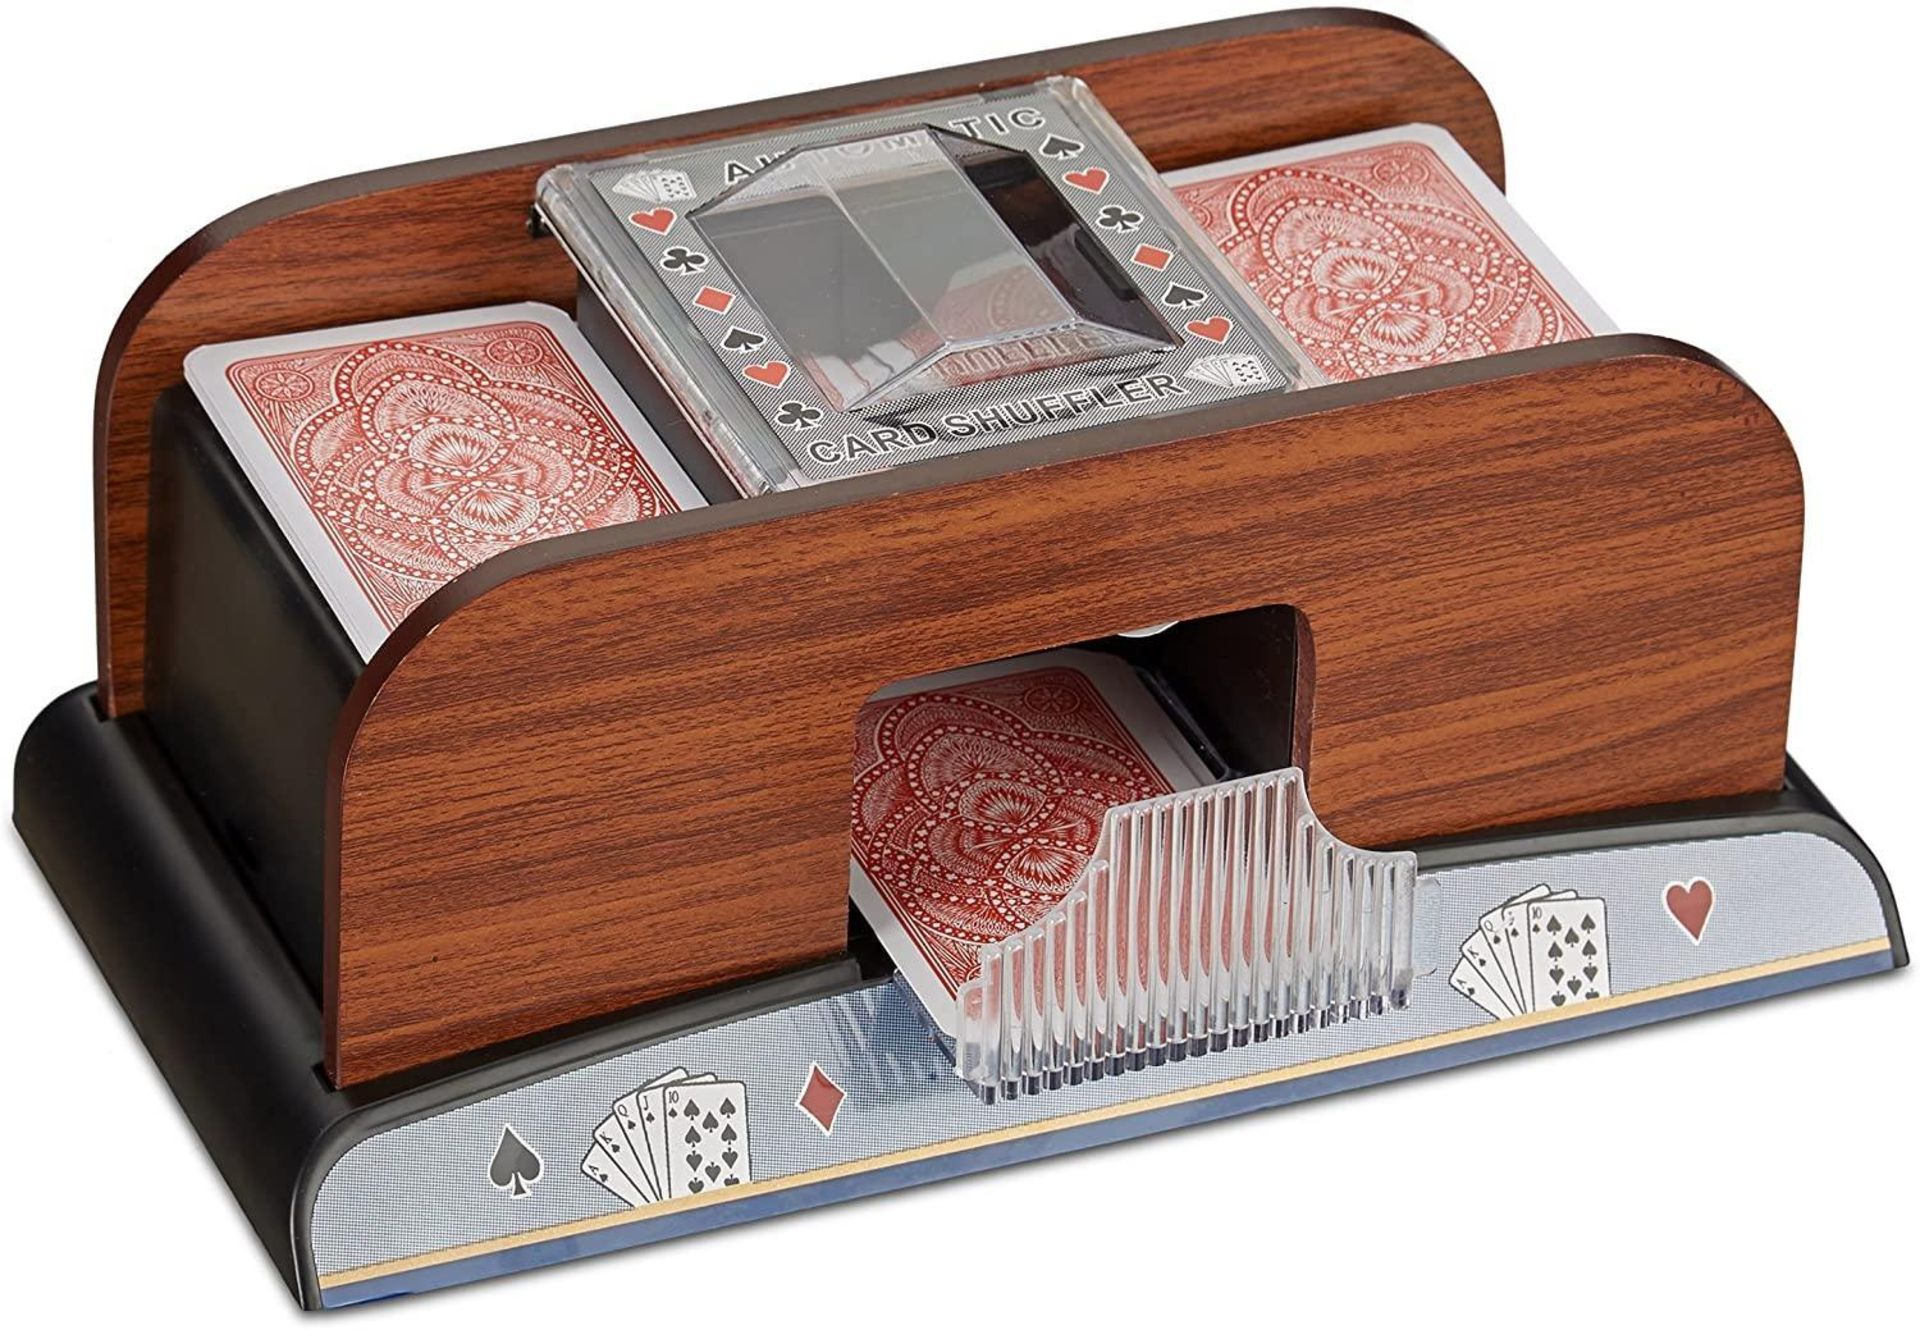 Relaxdays Card Shuffler Electronic, 2 Deck, Battery Operated Card Sorter Wood - £16.61 RRP